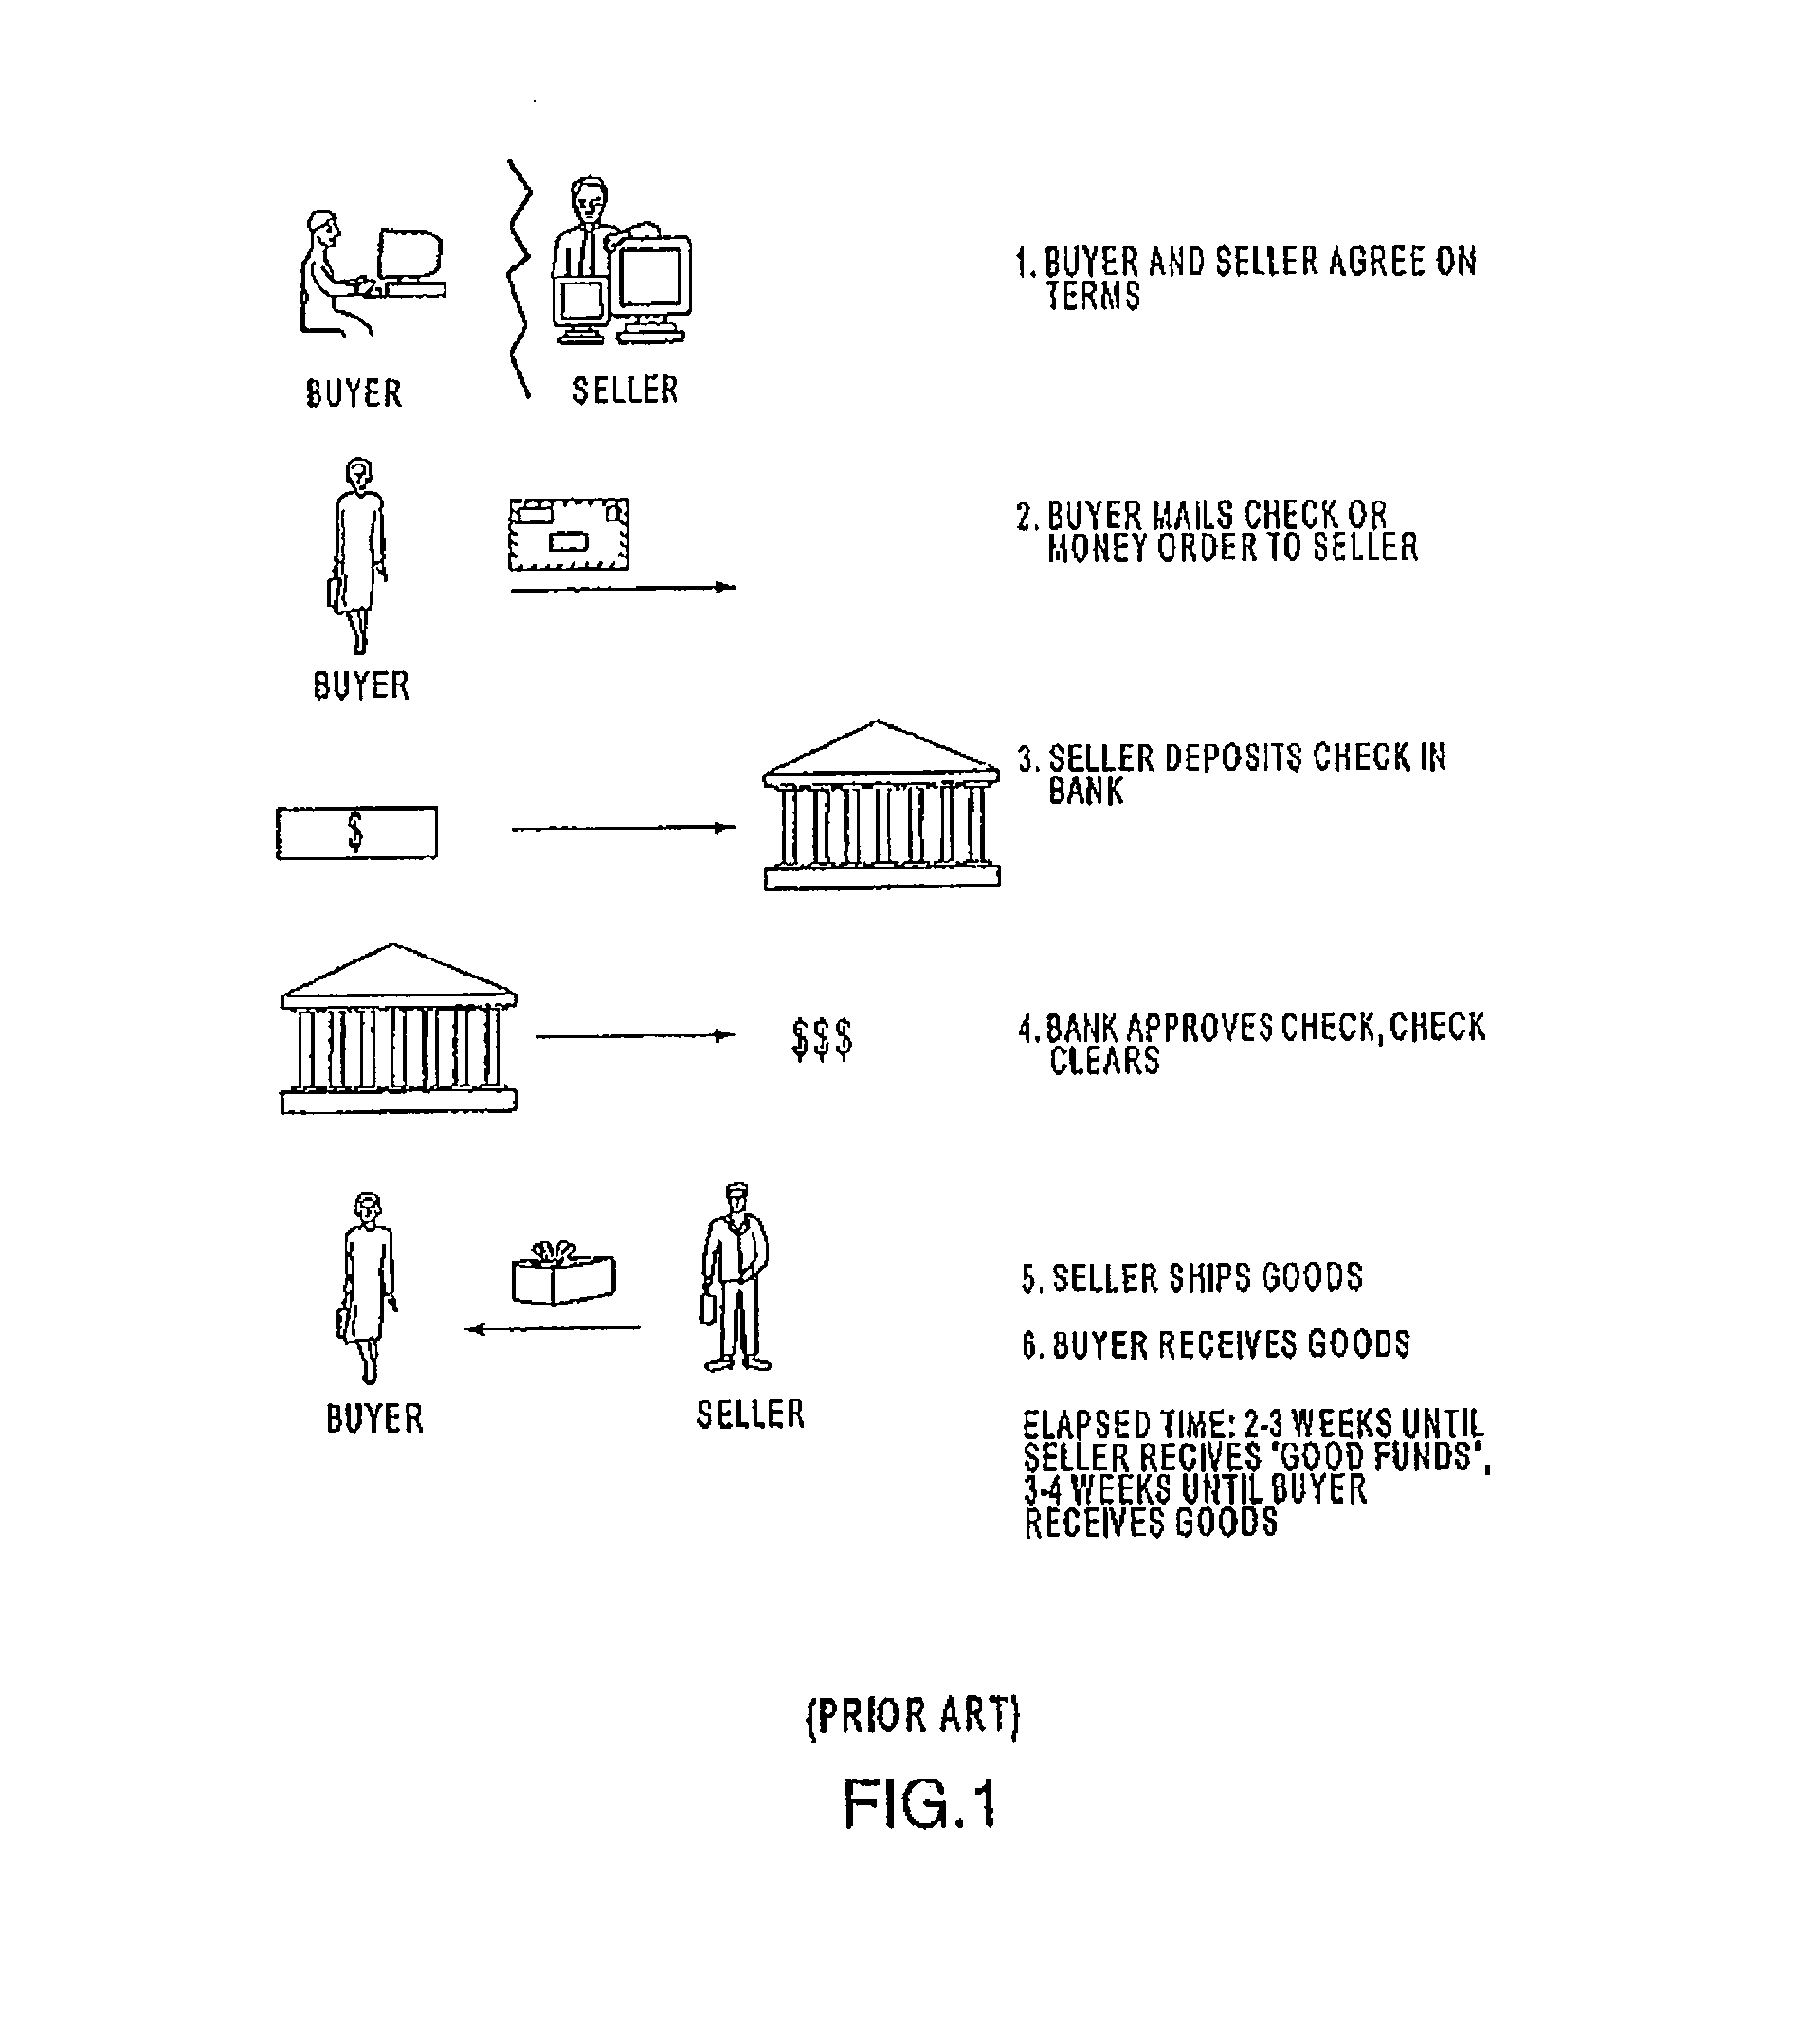 Systems and methods for transaction processing using a smartcard